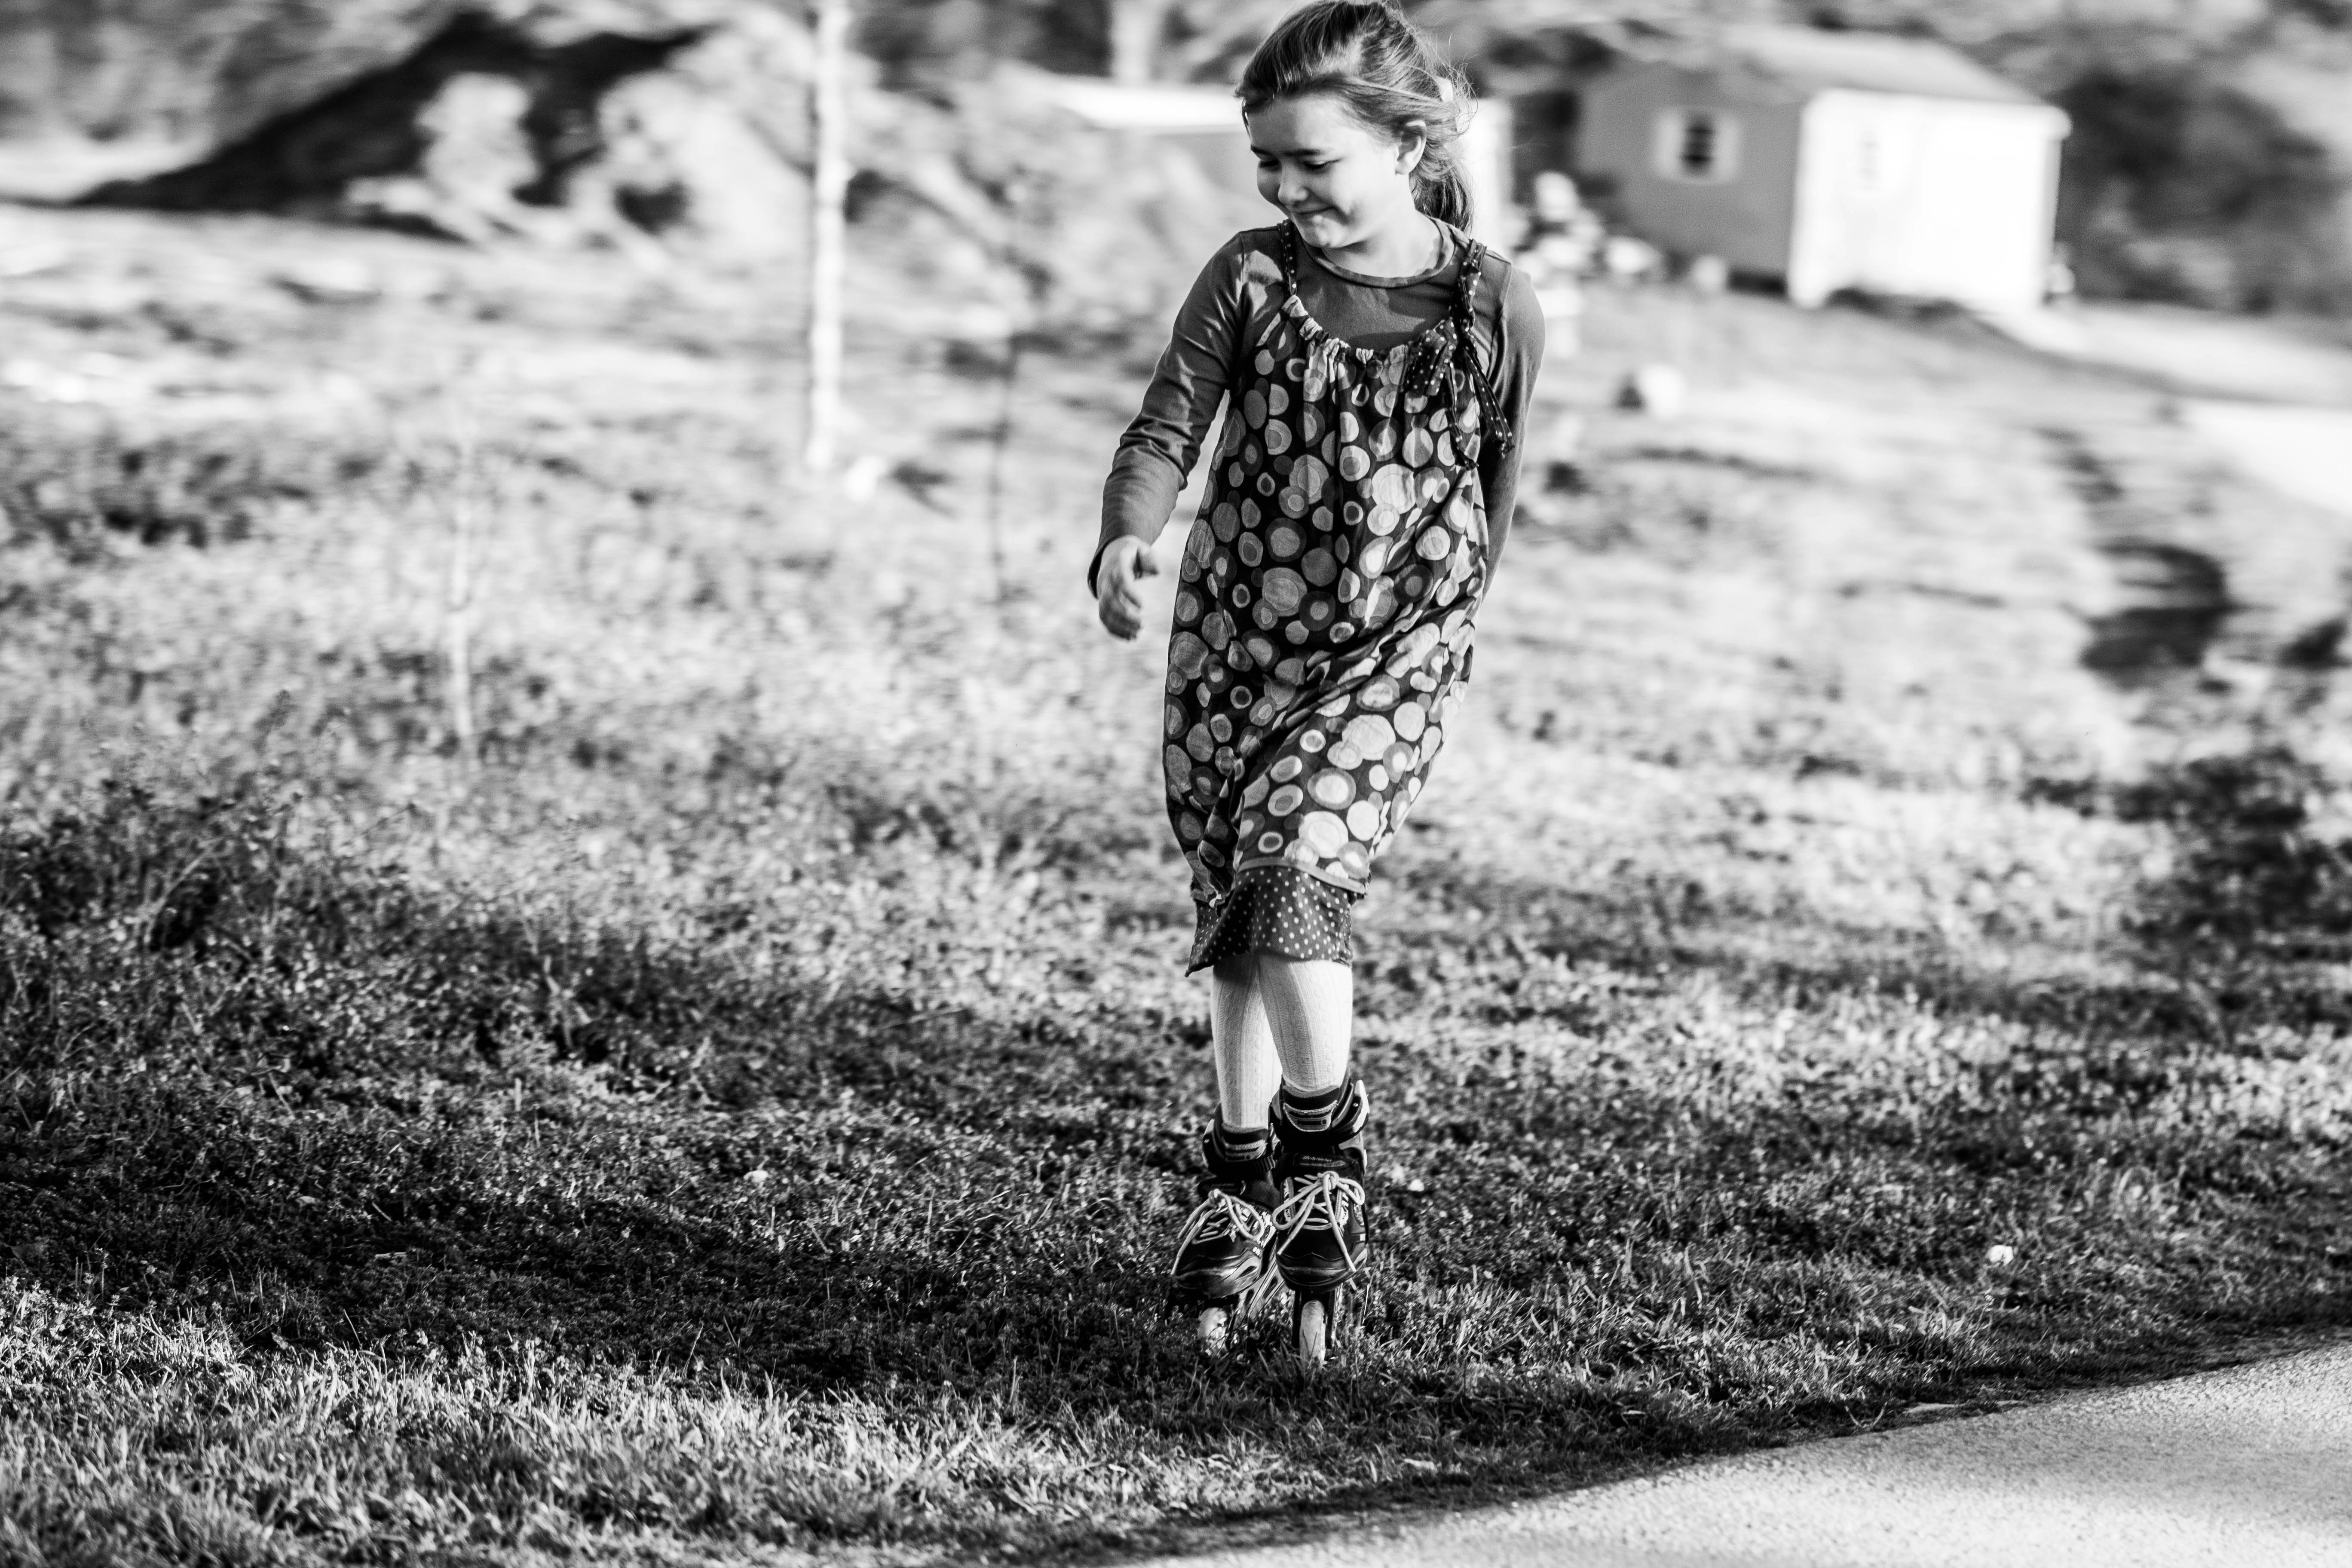 grayscale photo of girl in floral dress standing on grass field